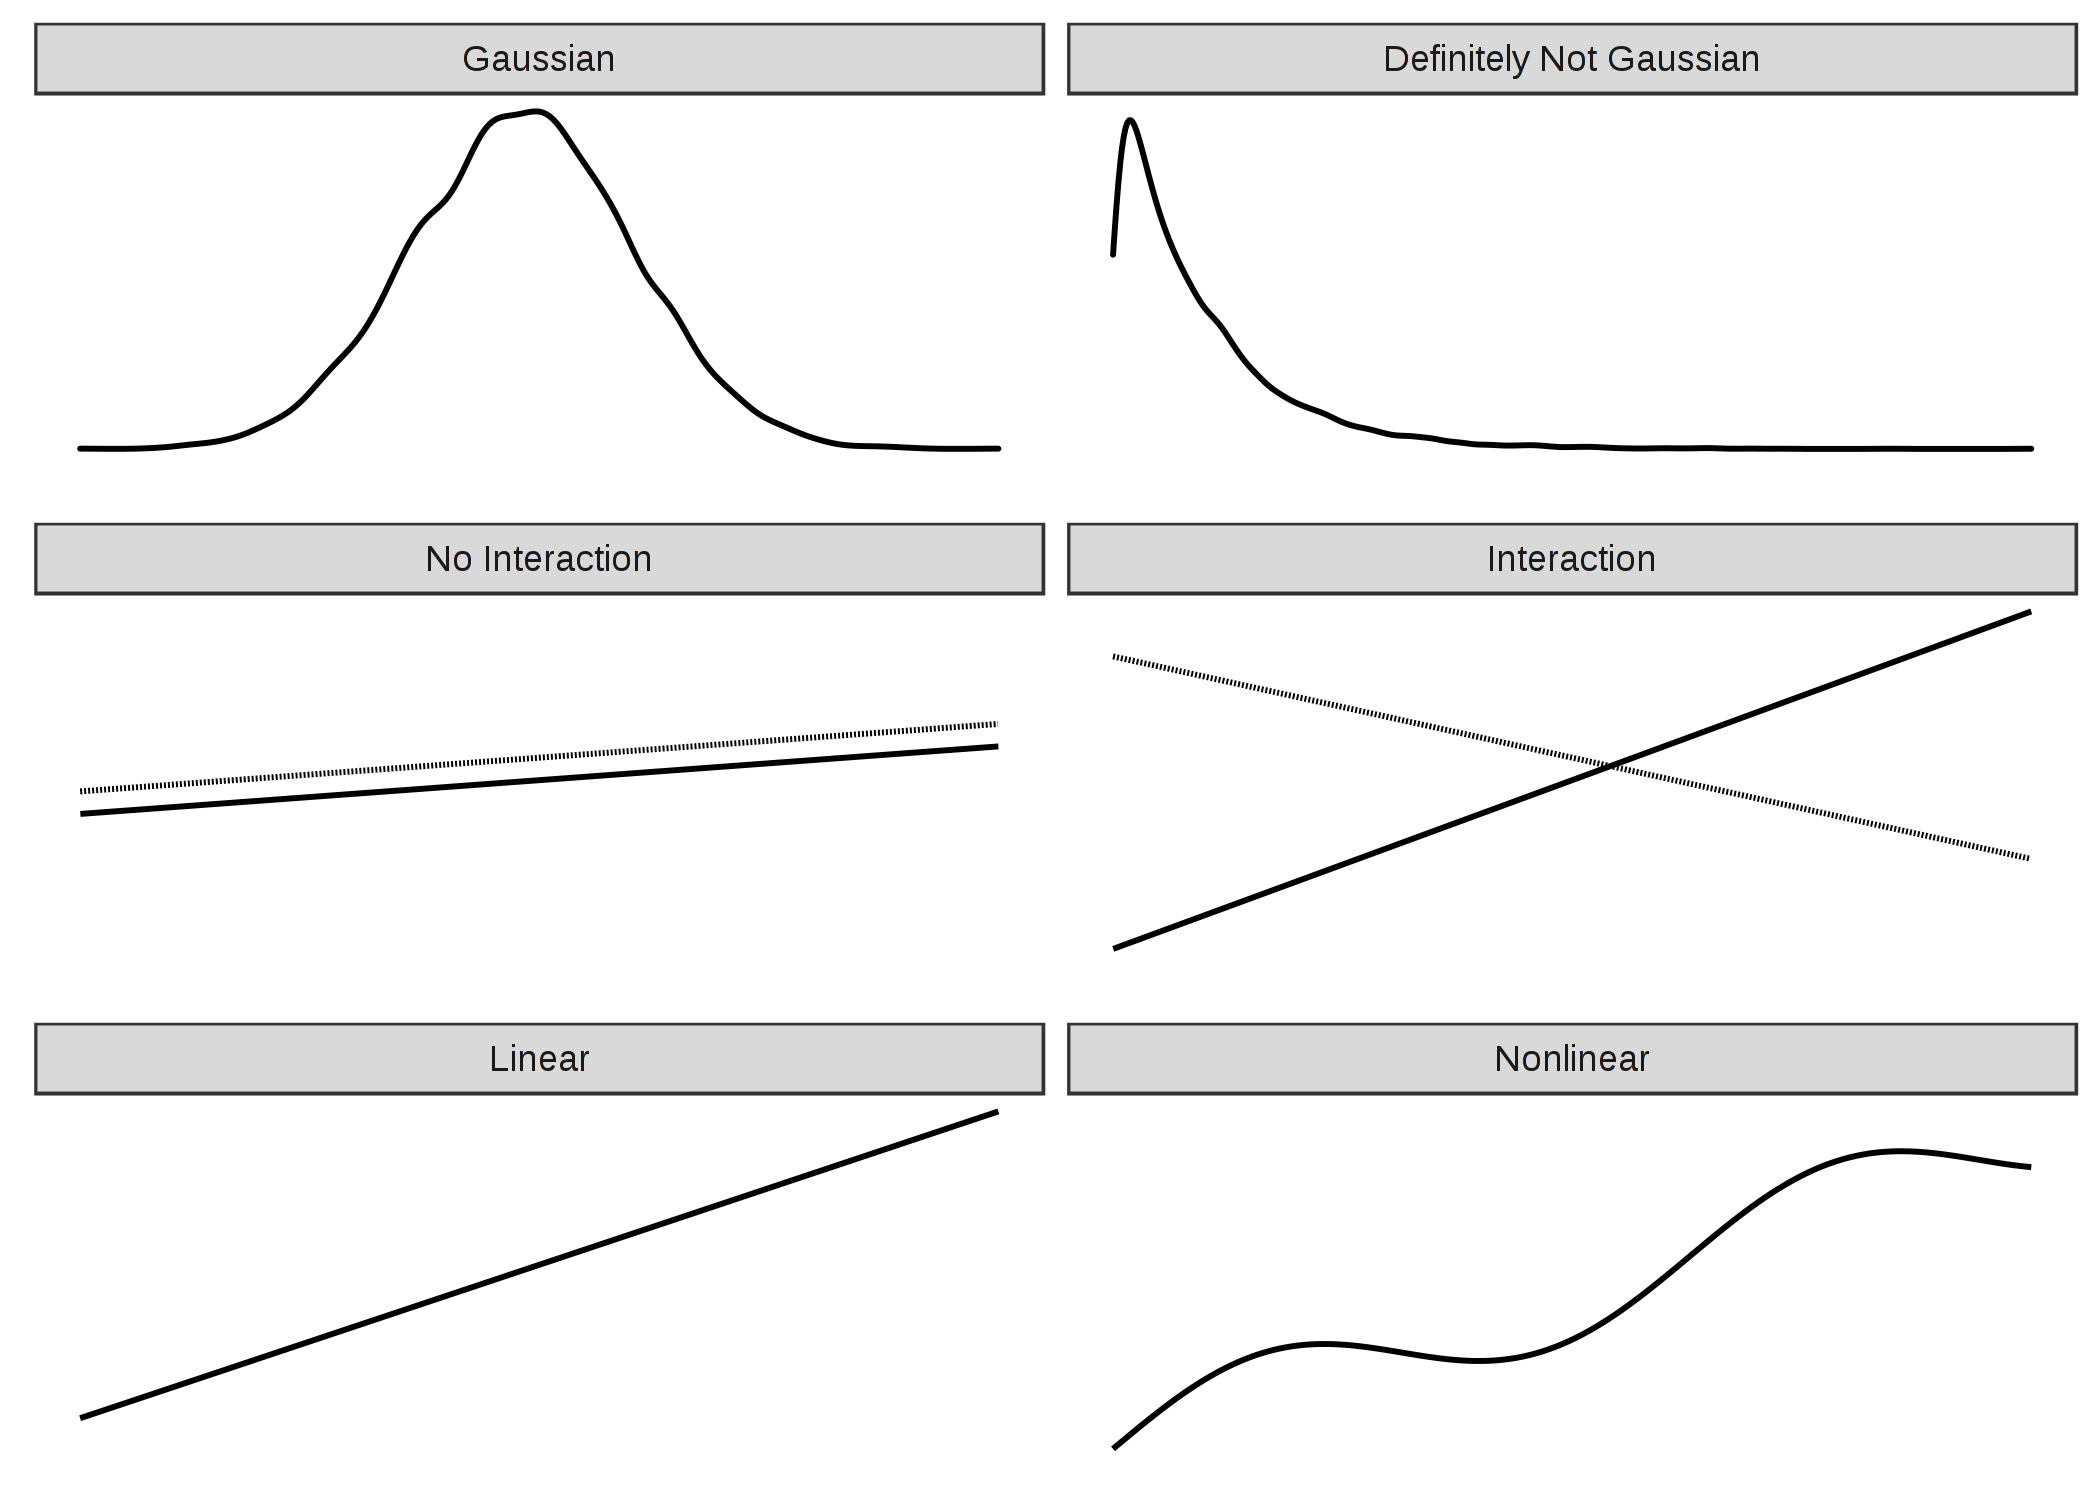 Three assumptions of the linear model (left side): Gaussian distribution of the outcome given the features, additivity (= no interactions) and linear relationship. Reality usually does not adhere to those assumptions (right side): Outcomes might have non-Gaussian distributions, features might interact and the relationship might be nonlinear.